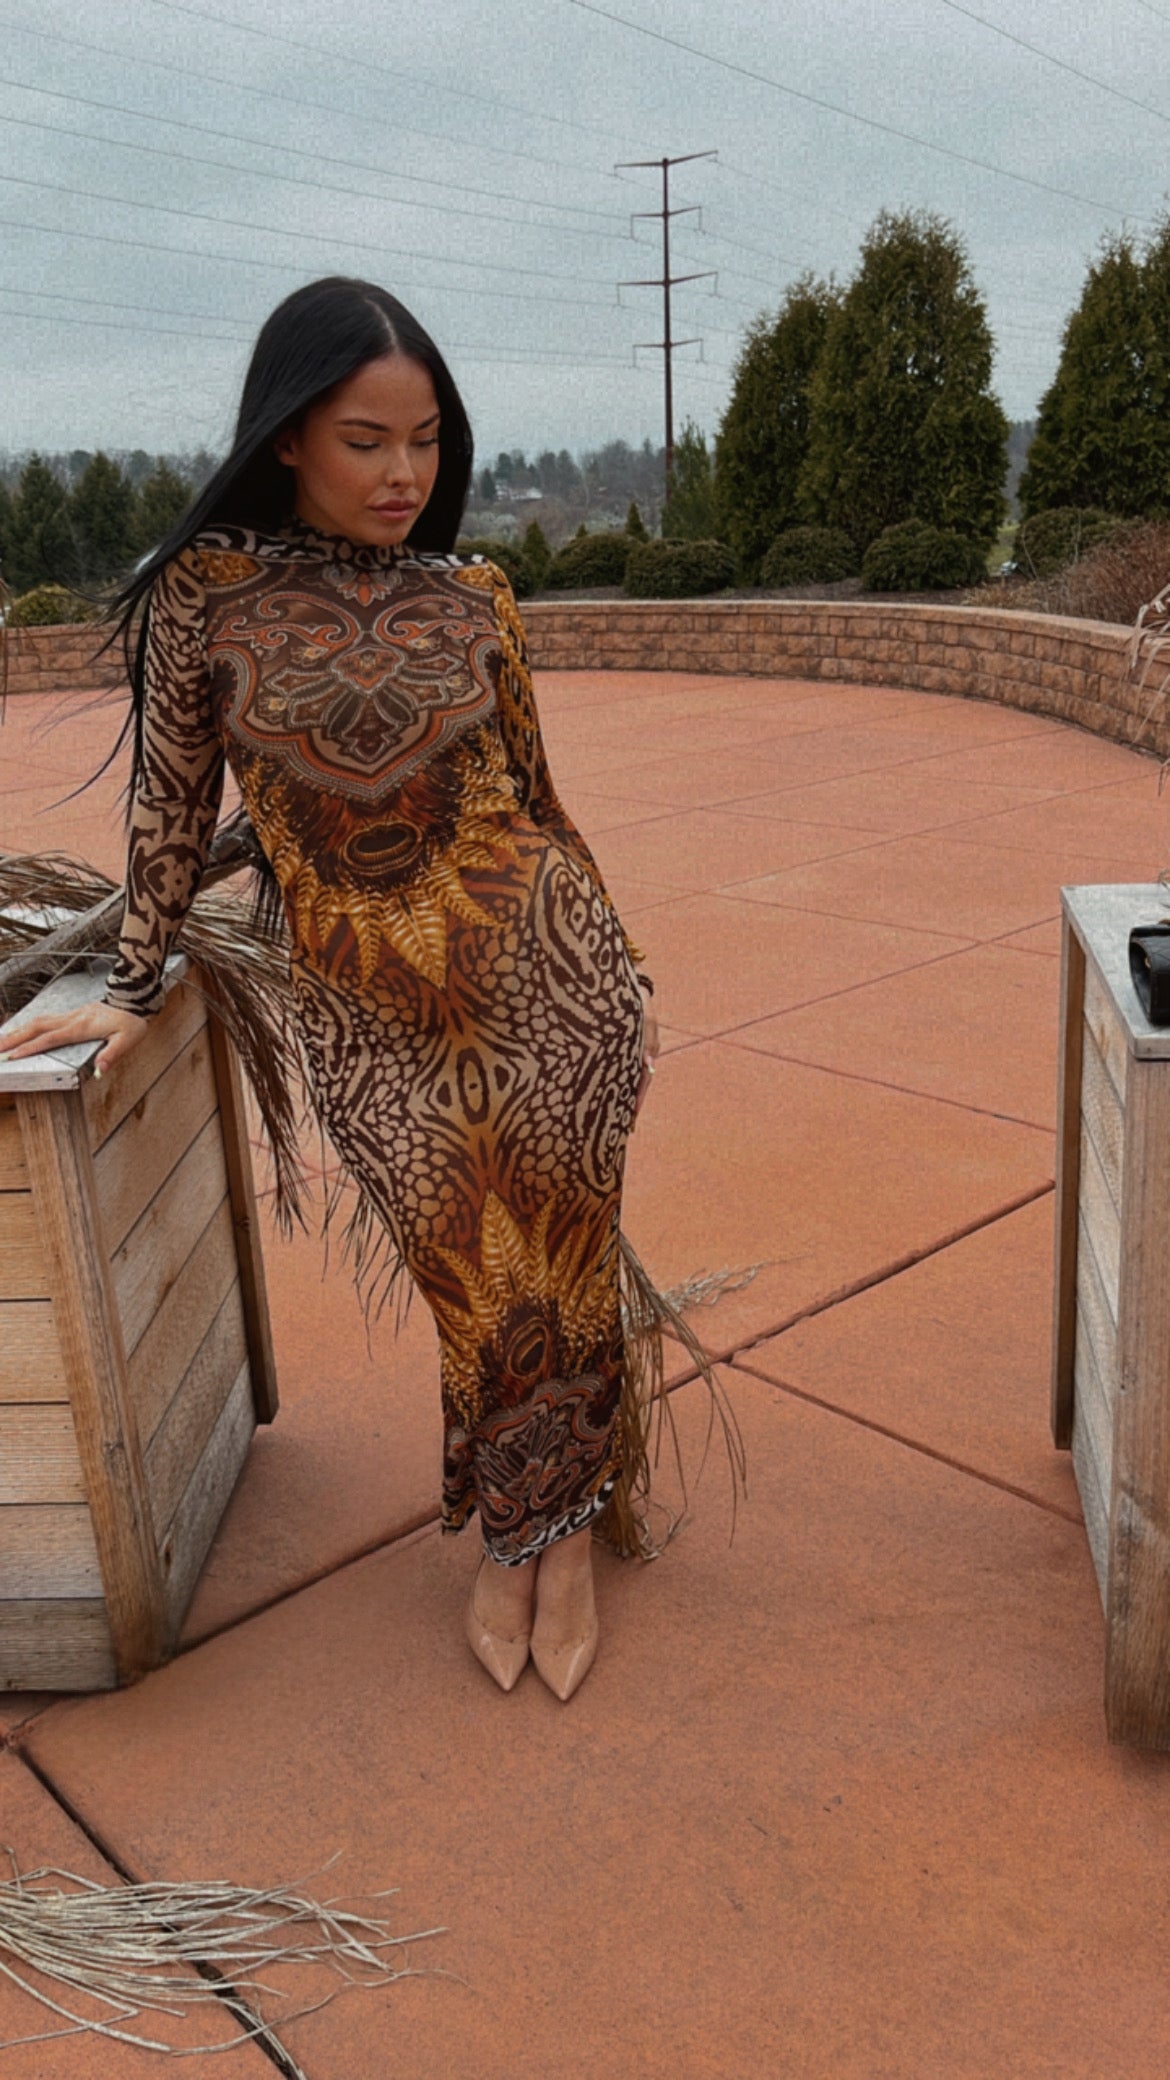 “THE UNCAGED LIONESS” mesh open back tie dress